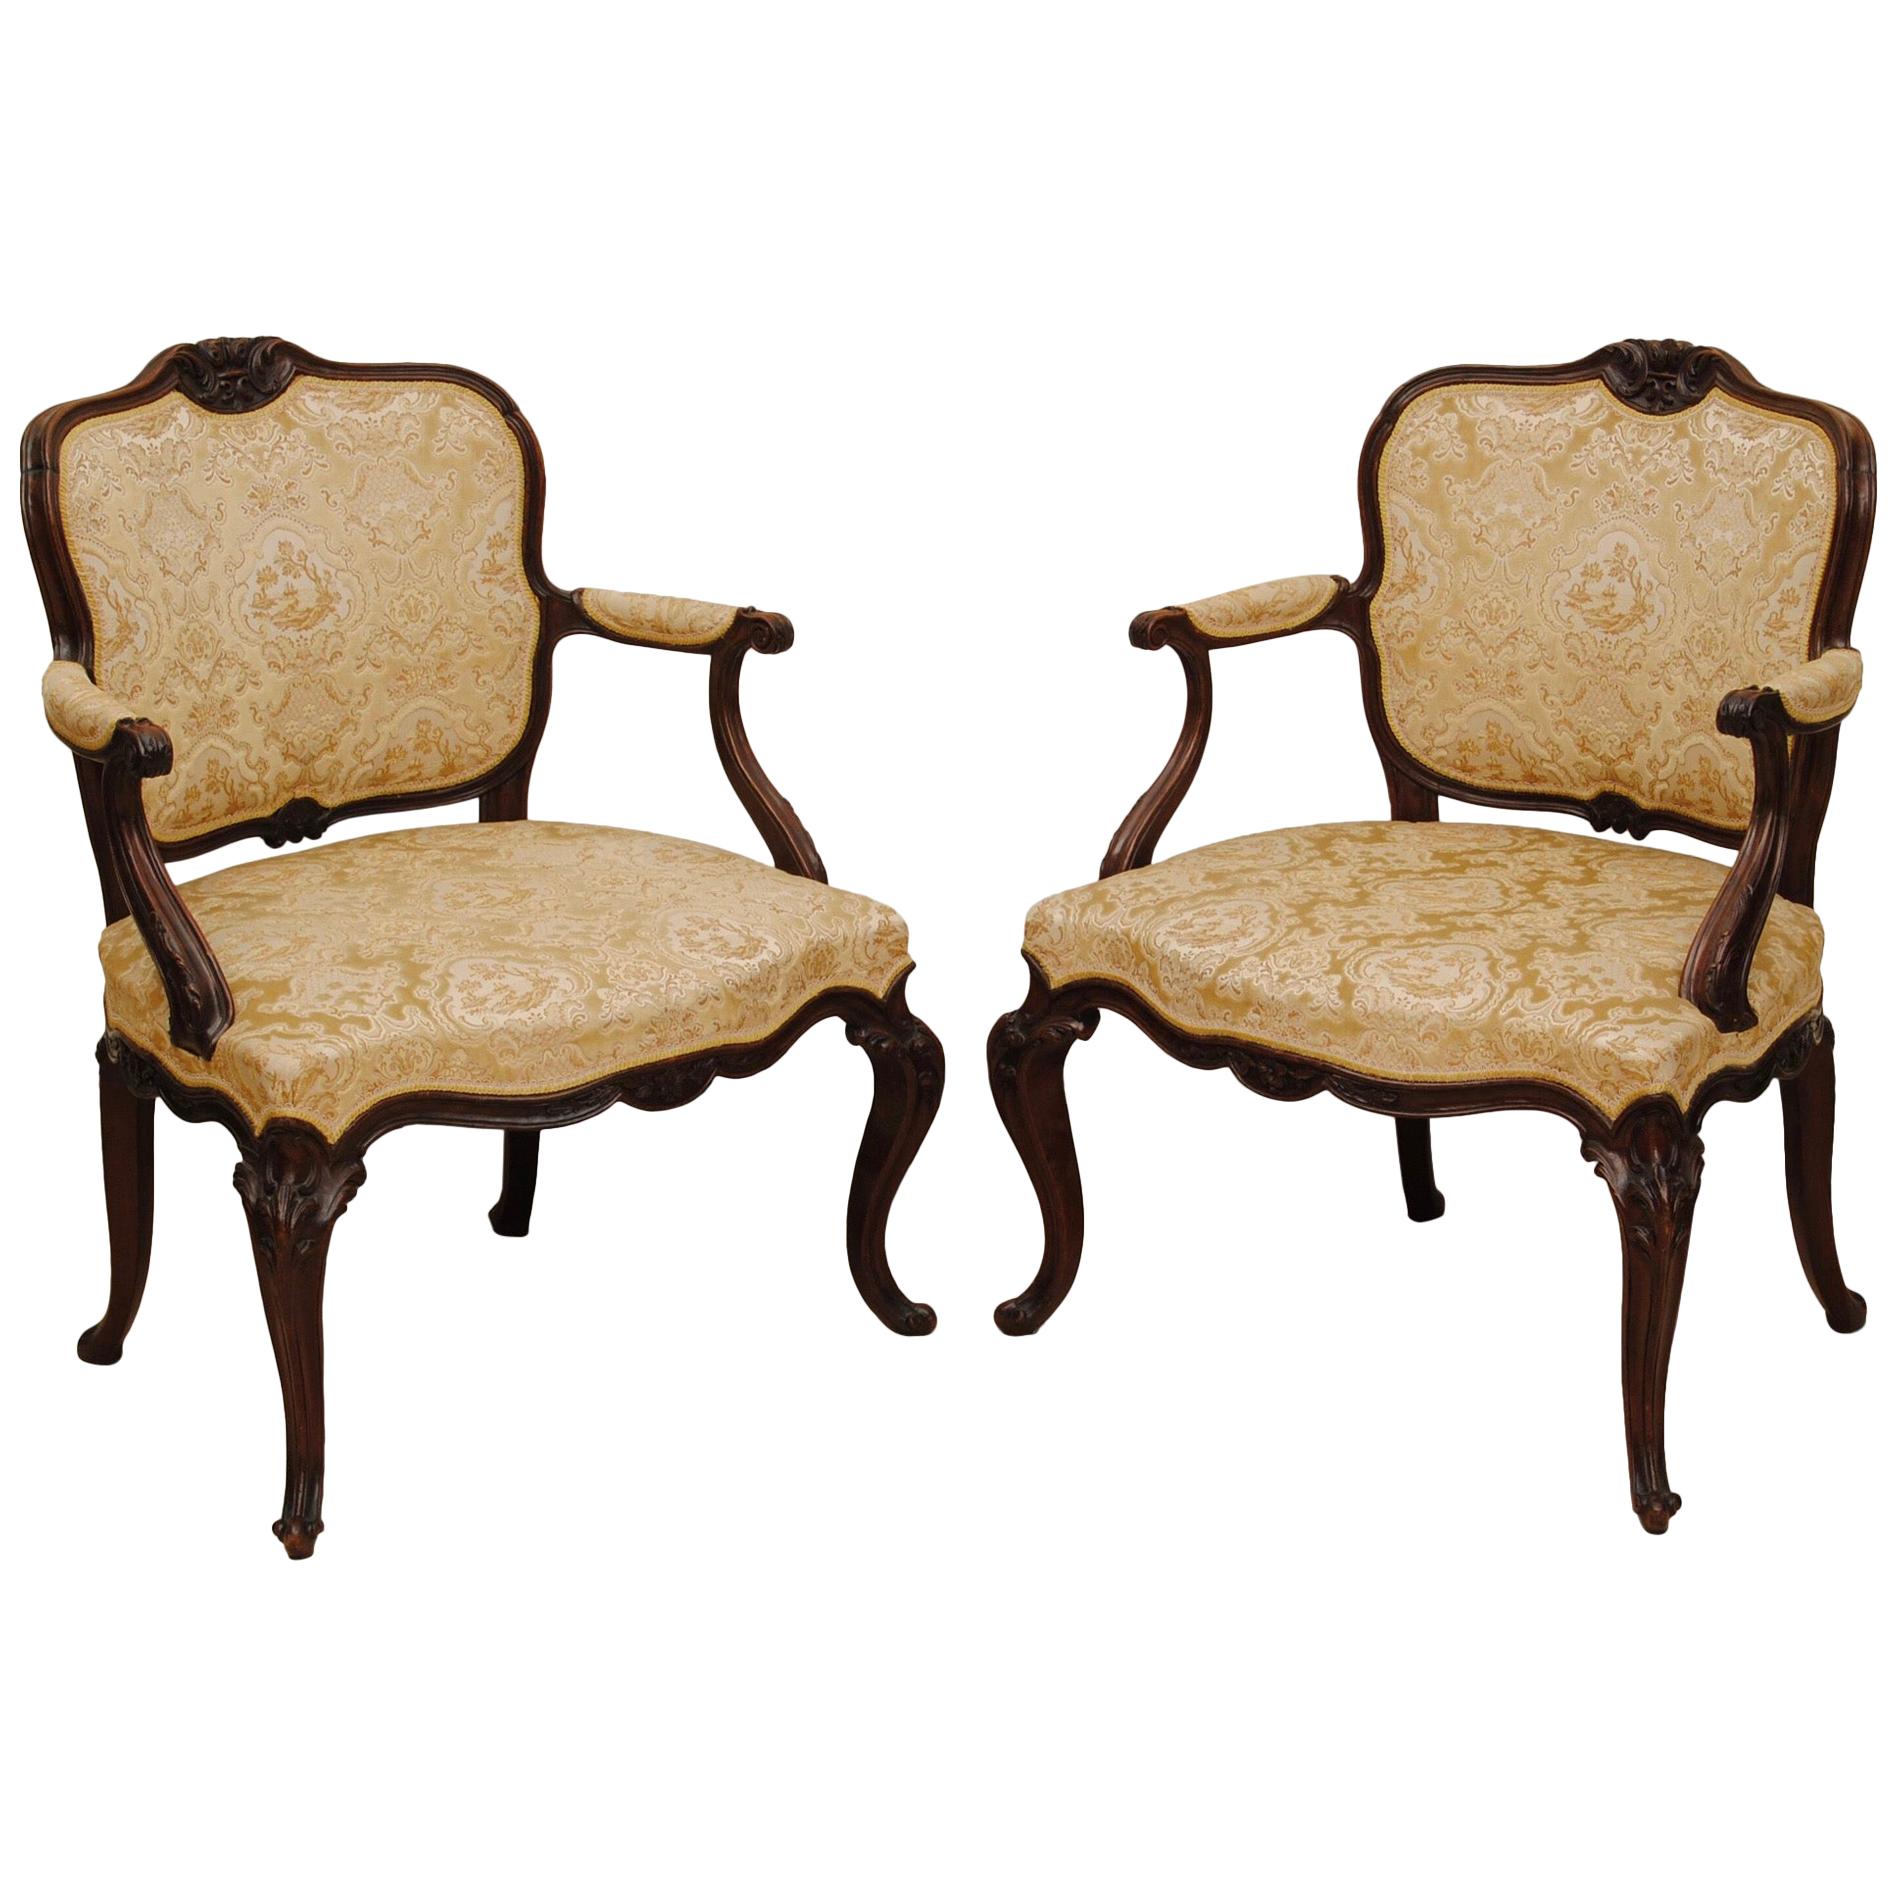 Pair of Hepplewhite Period Carved Mahogany Open Armchairs